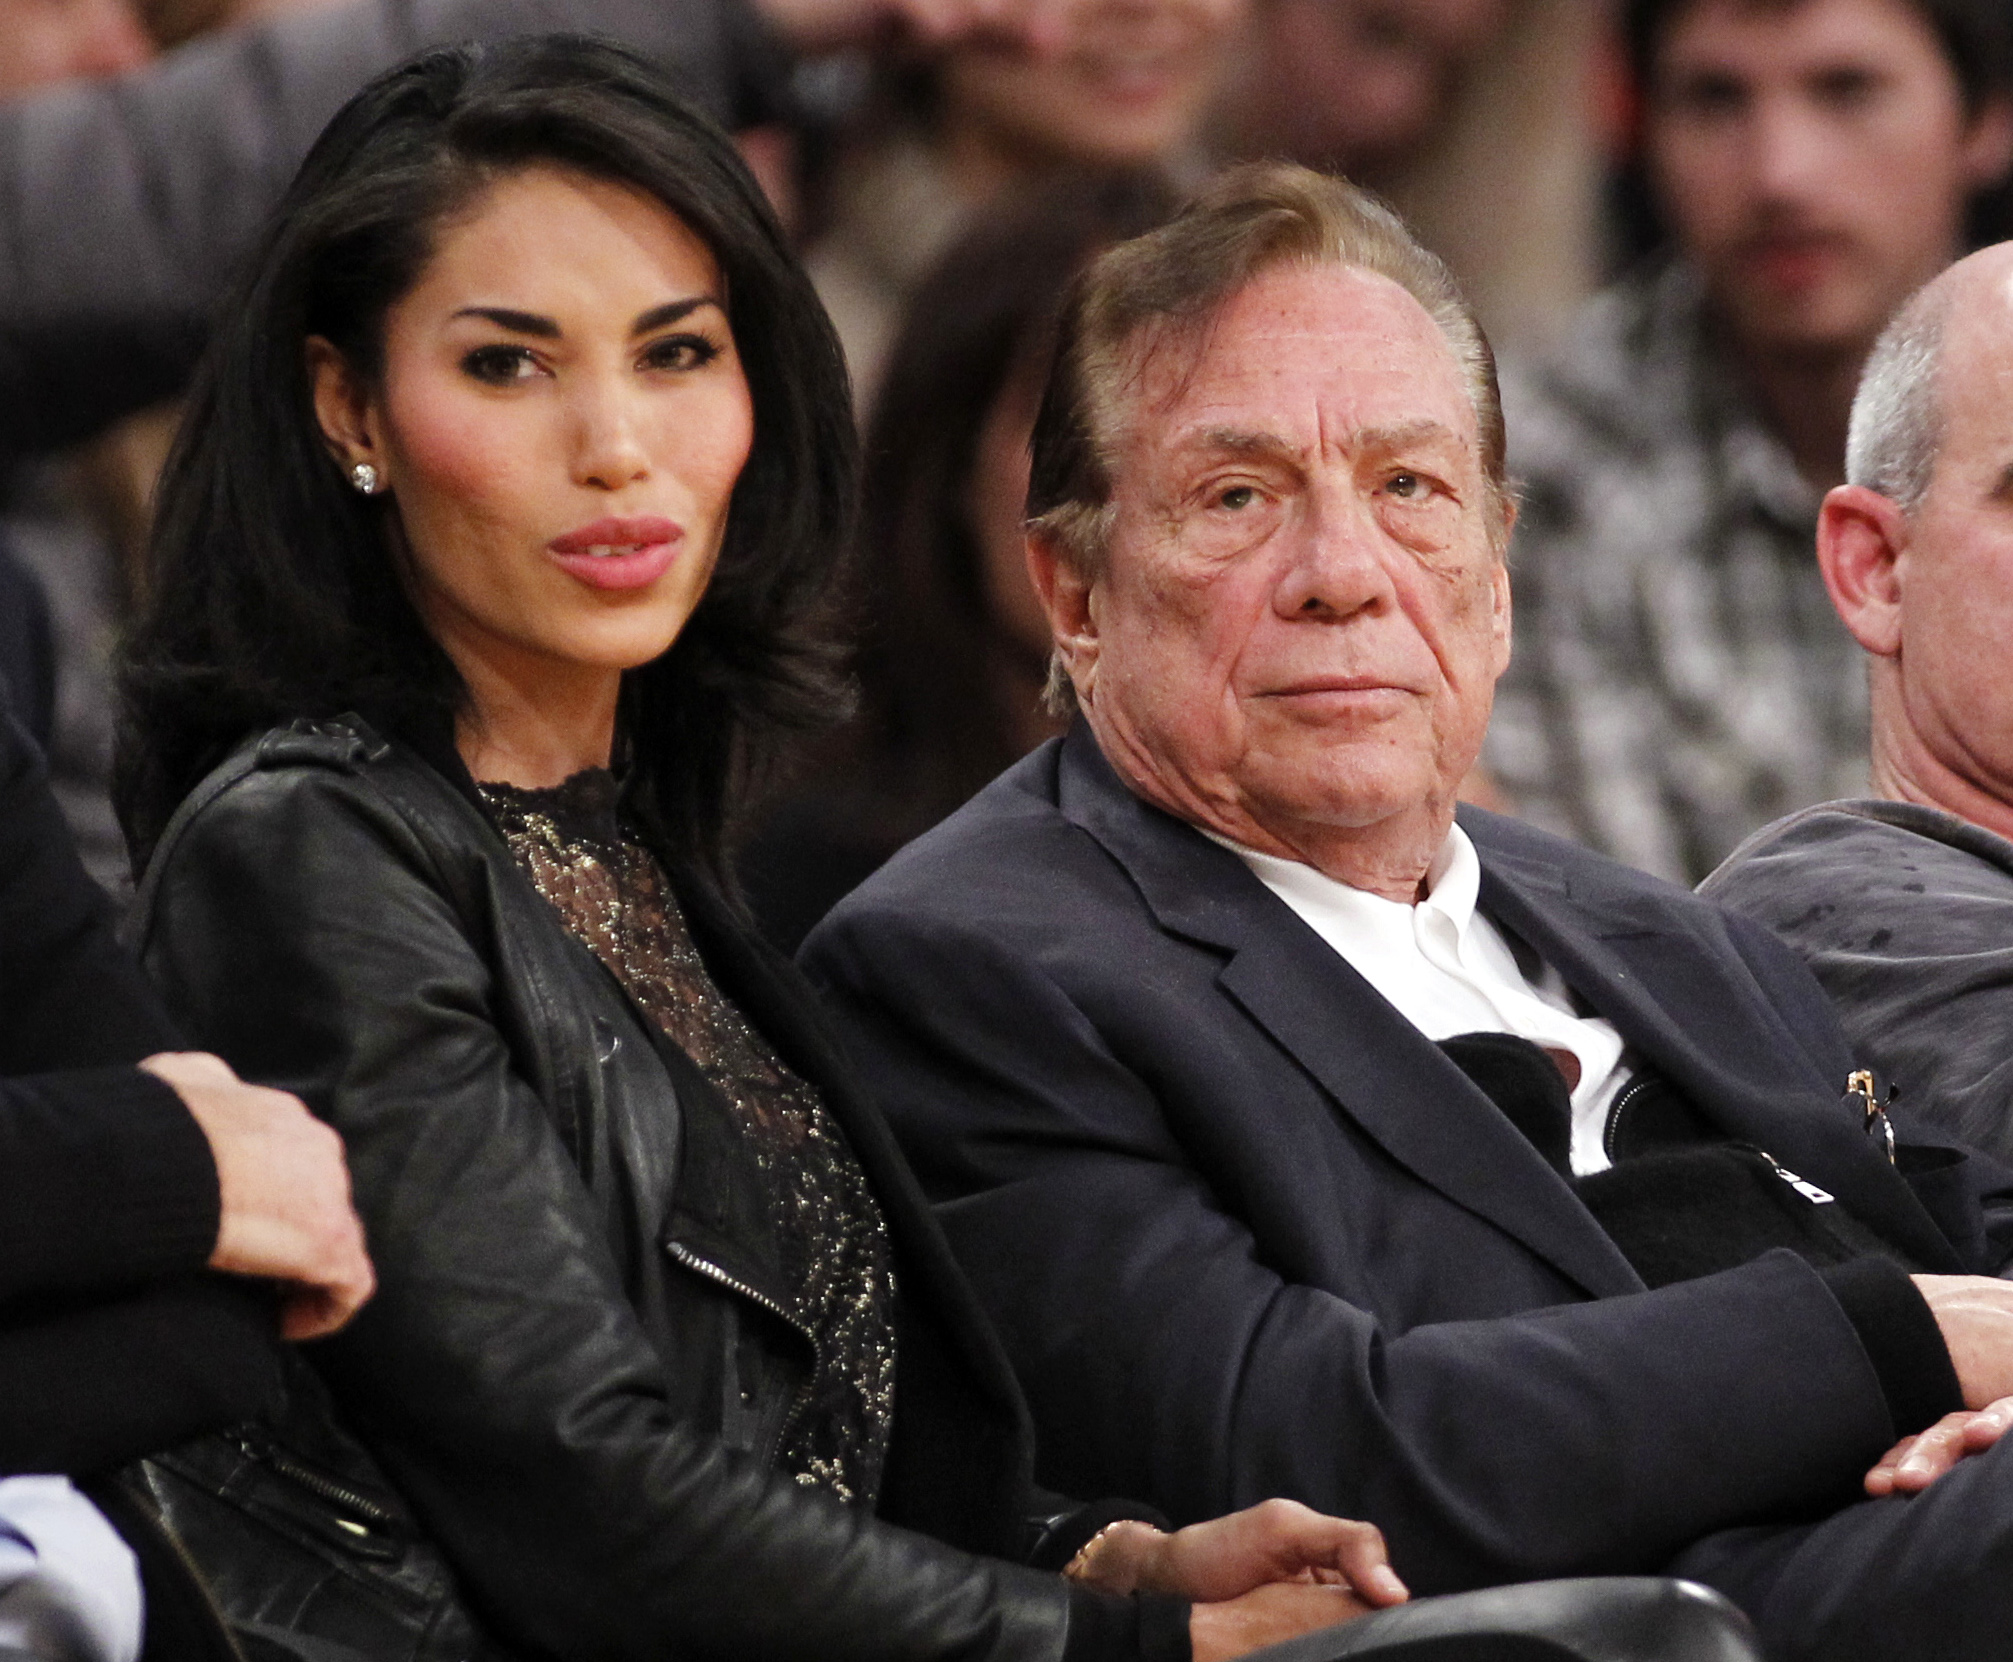 FILE - In this Dec. 19, 2010, file photo, Los Angeles Clippers owner Donald Sterling, third right, sits with V. Stiviano, left, as  they watch the Clippers play the Los Angeles Lakers during an NBA preseason basketball game in Los Angeles. NBA commissioner Adam Silver announced Tuesday, April 29, 2014, that he is banning the owner for life from the Clippers organization over racist comments in recording. (AP Photo/Danny Moloshok, File)